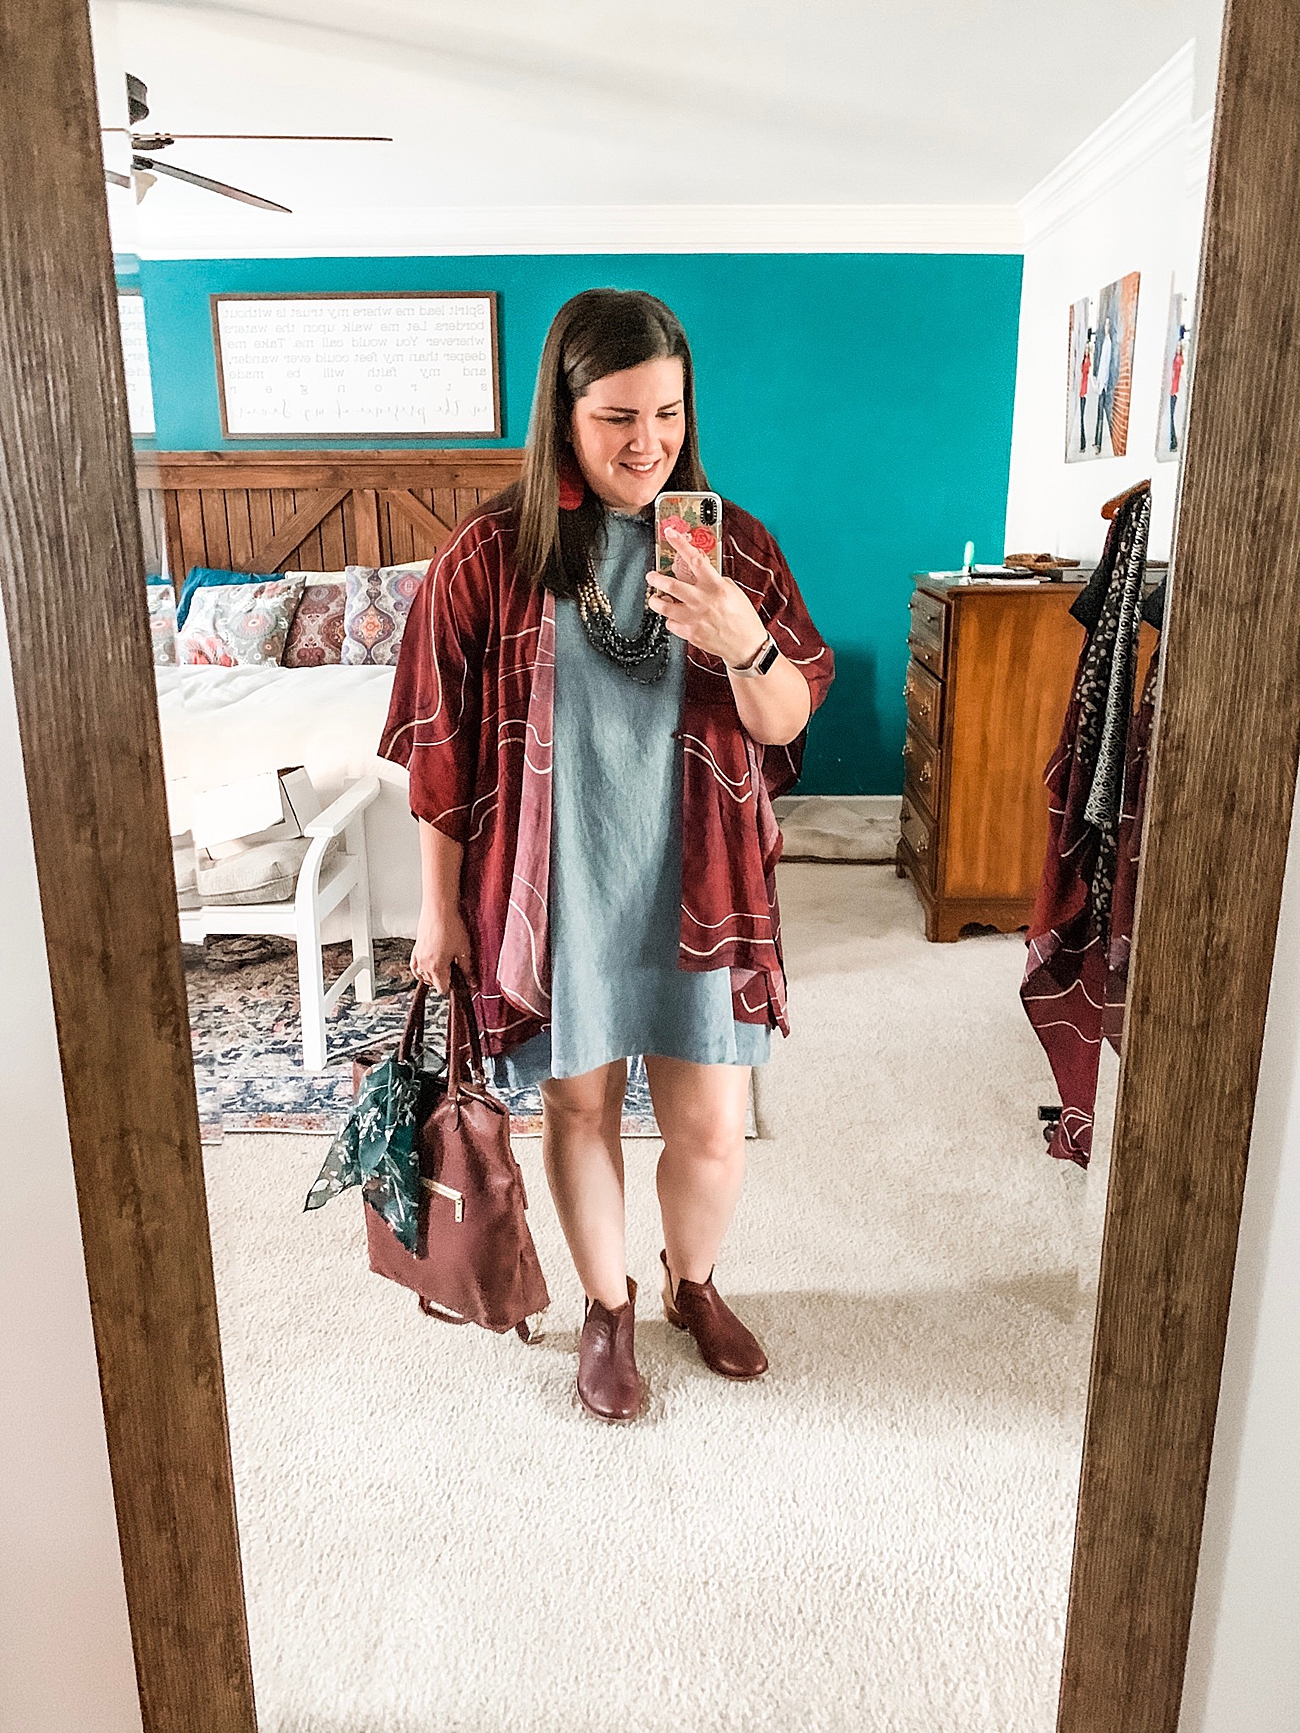 Sseko Designs Fall 2019 Sojourner Collection | Review + Try-On | Fair Trade Fashion #fairtradestyle #ethicalfashion http://www.ssekodesigns.com/mollystillman (6)